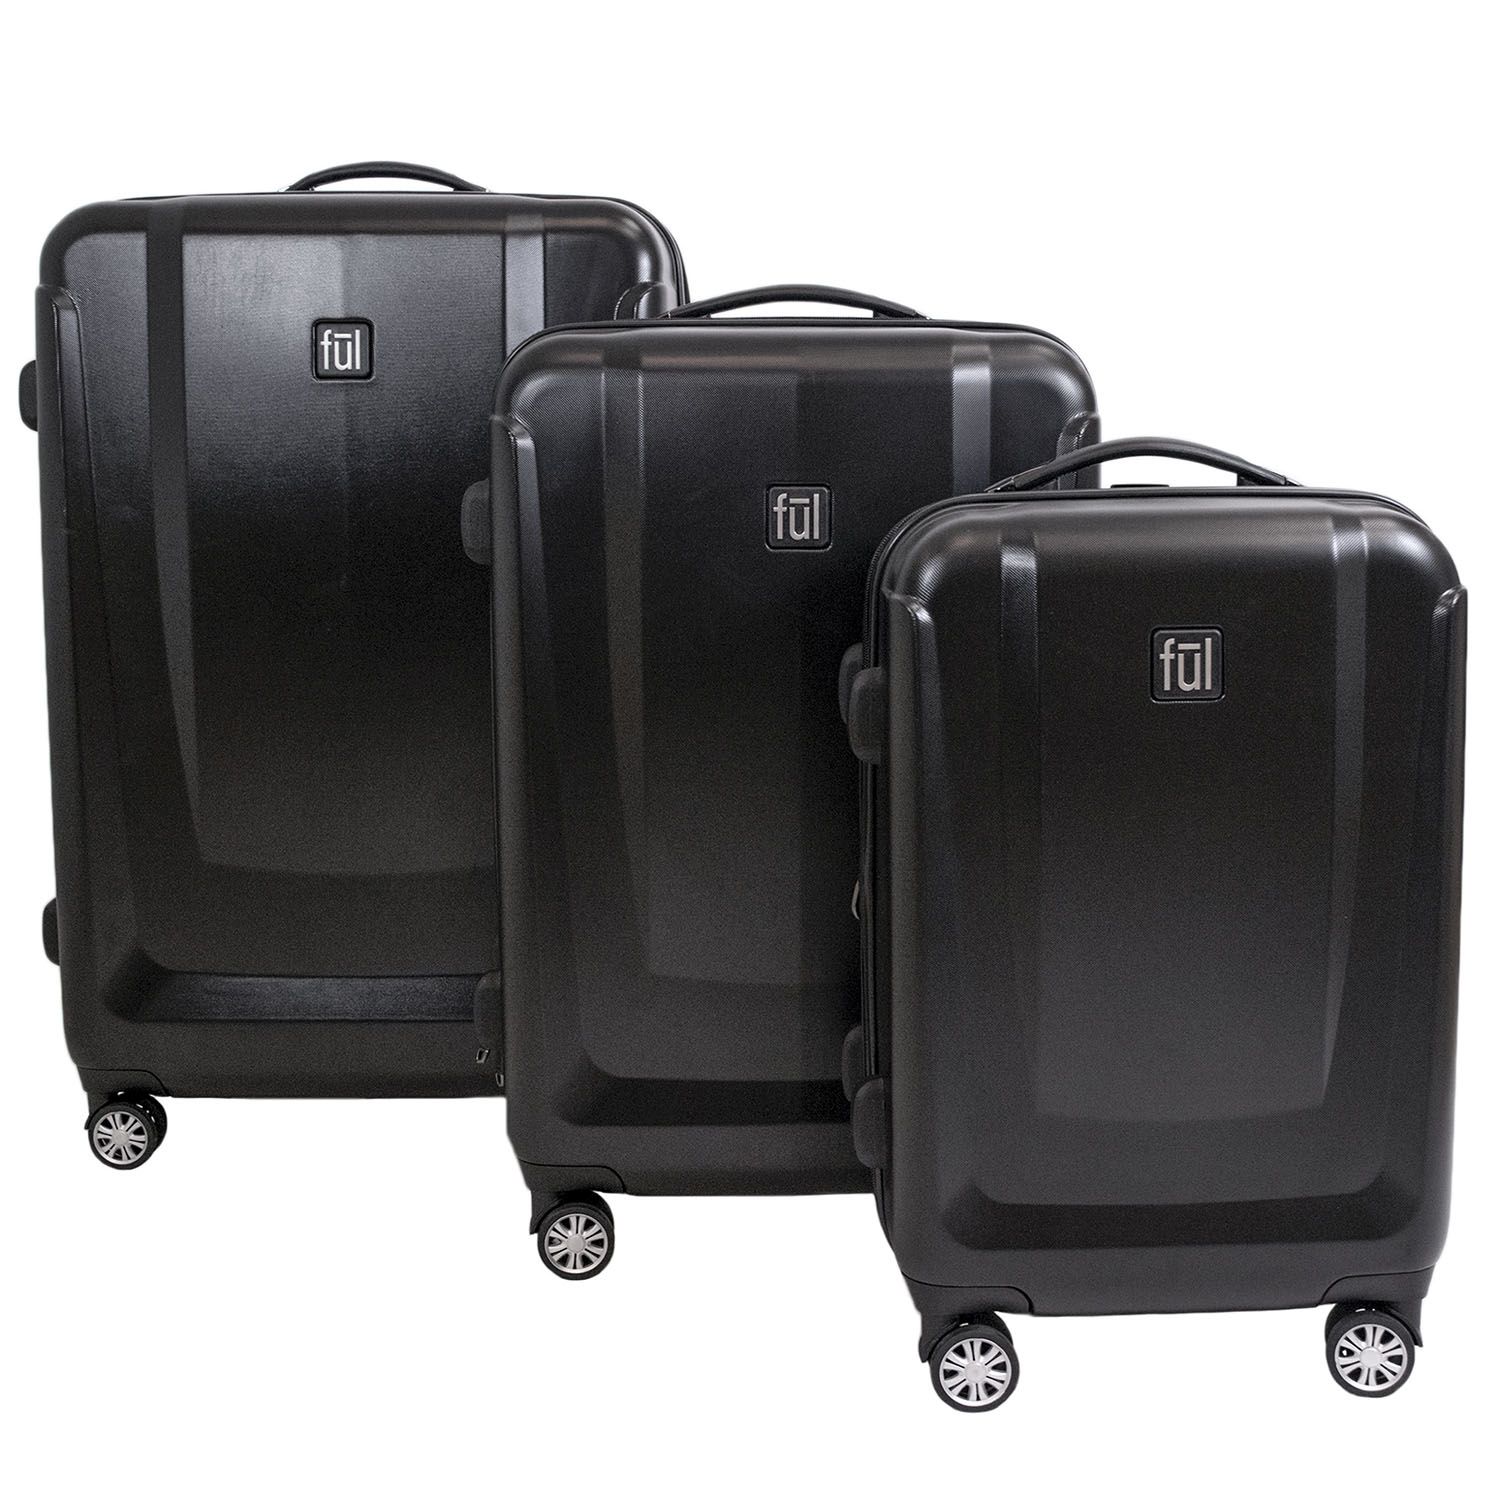 ful Load Rider Hard Case Spinner 3 Piece Luggage Set